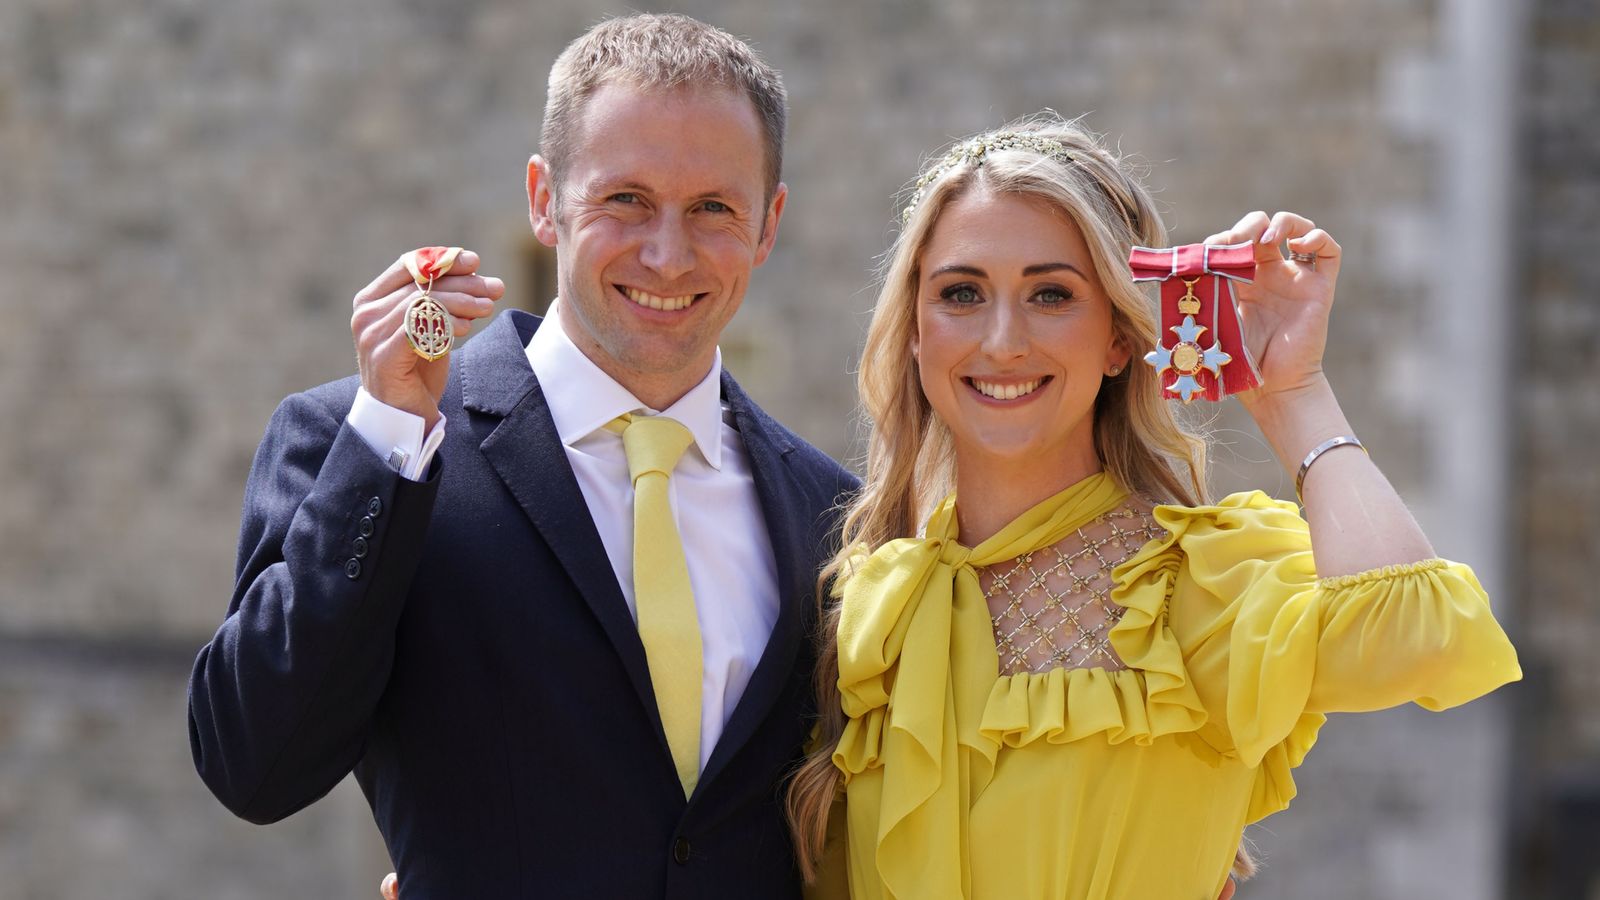 Cycling legends Jason and Laura Kenny receive honours after winning 12 gold medals between them